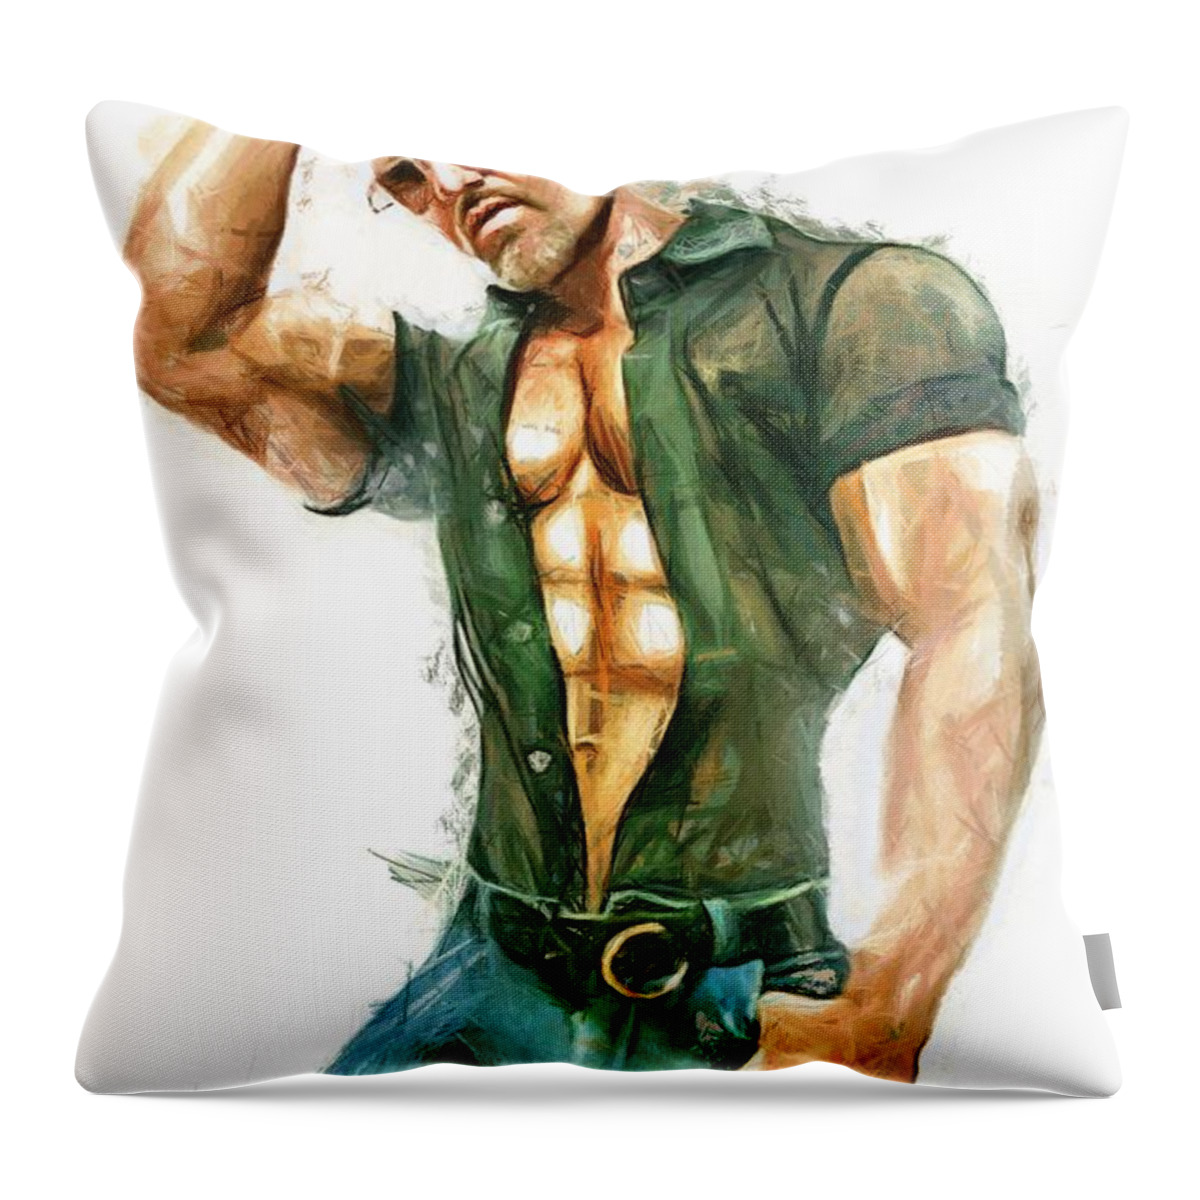 Bombelkie Throw Pillow featuring the digital art Splash of Artistry by Bombelkie - Marcin and Dawid Witukiewicz